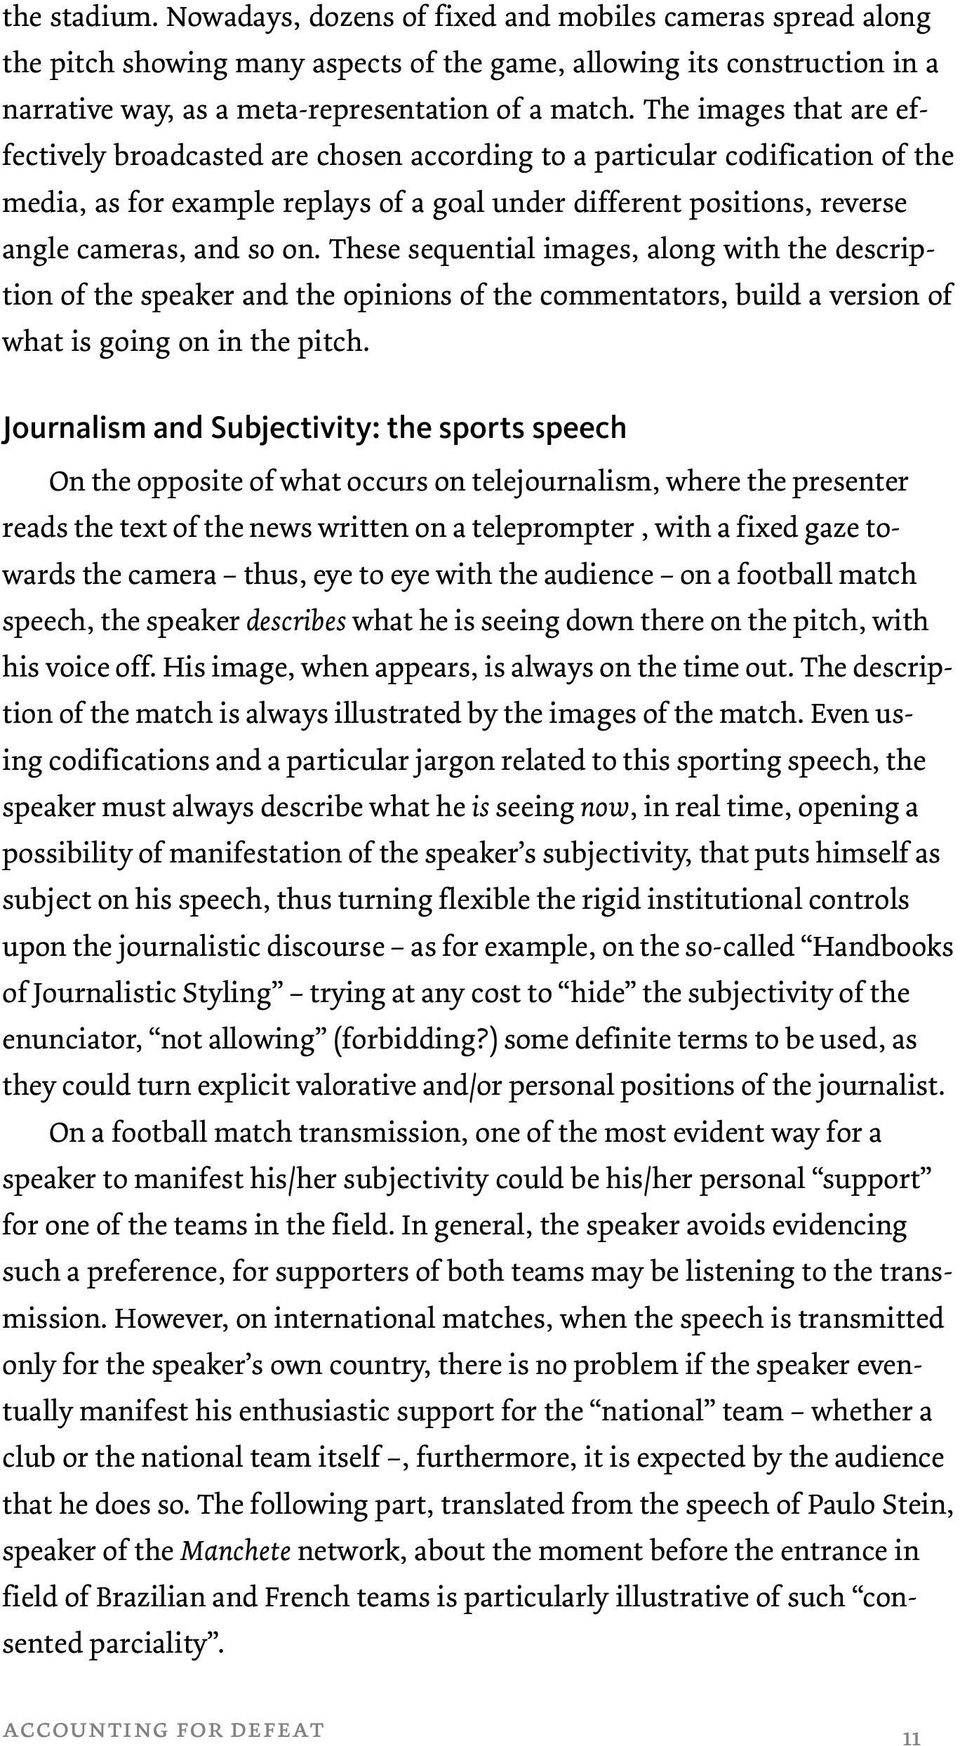 on. These sequential images, along with the description of the speaker and the opinions of the commentators, build a version of what is going on in the pitch.